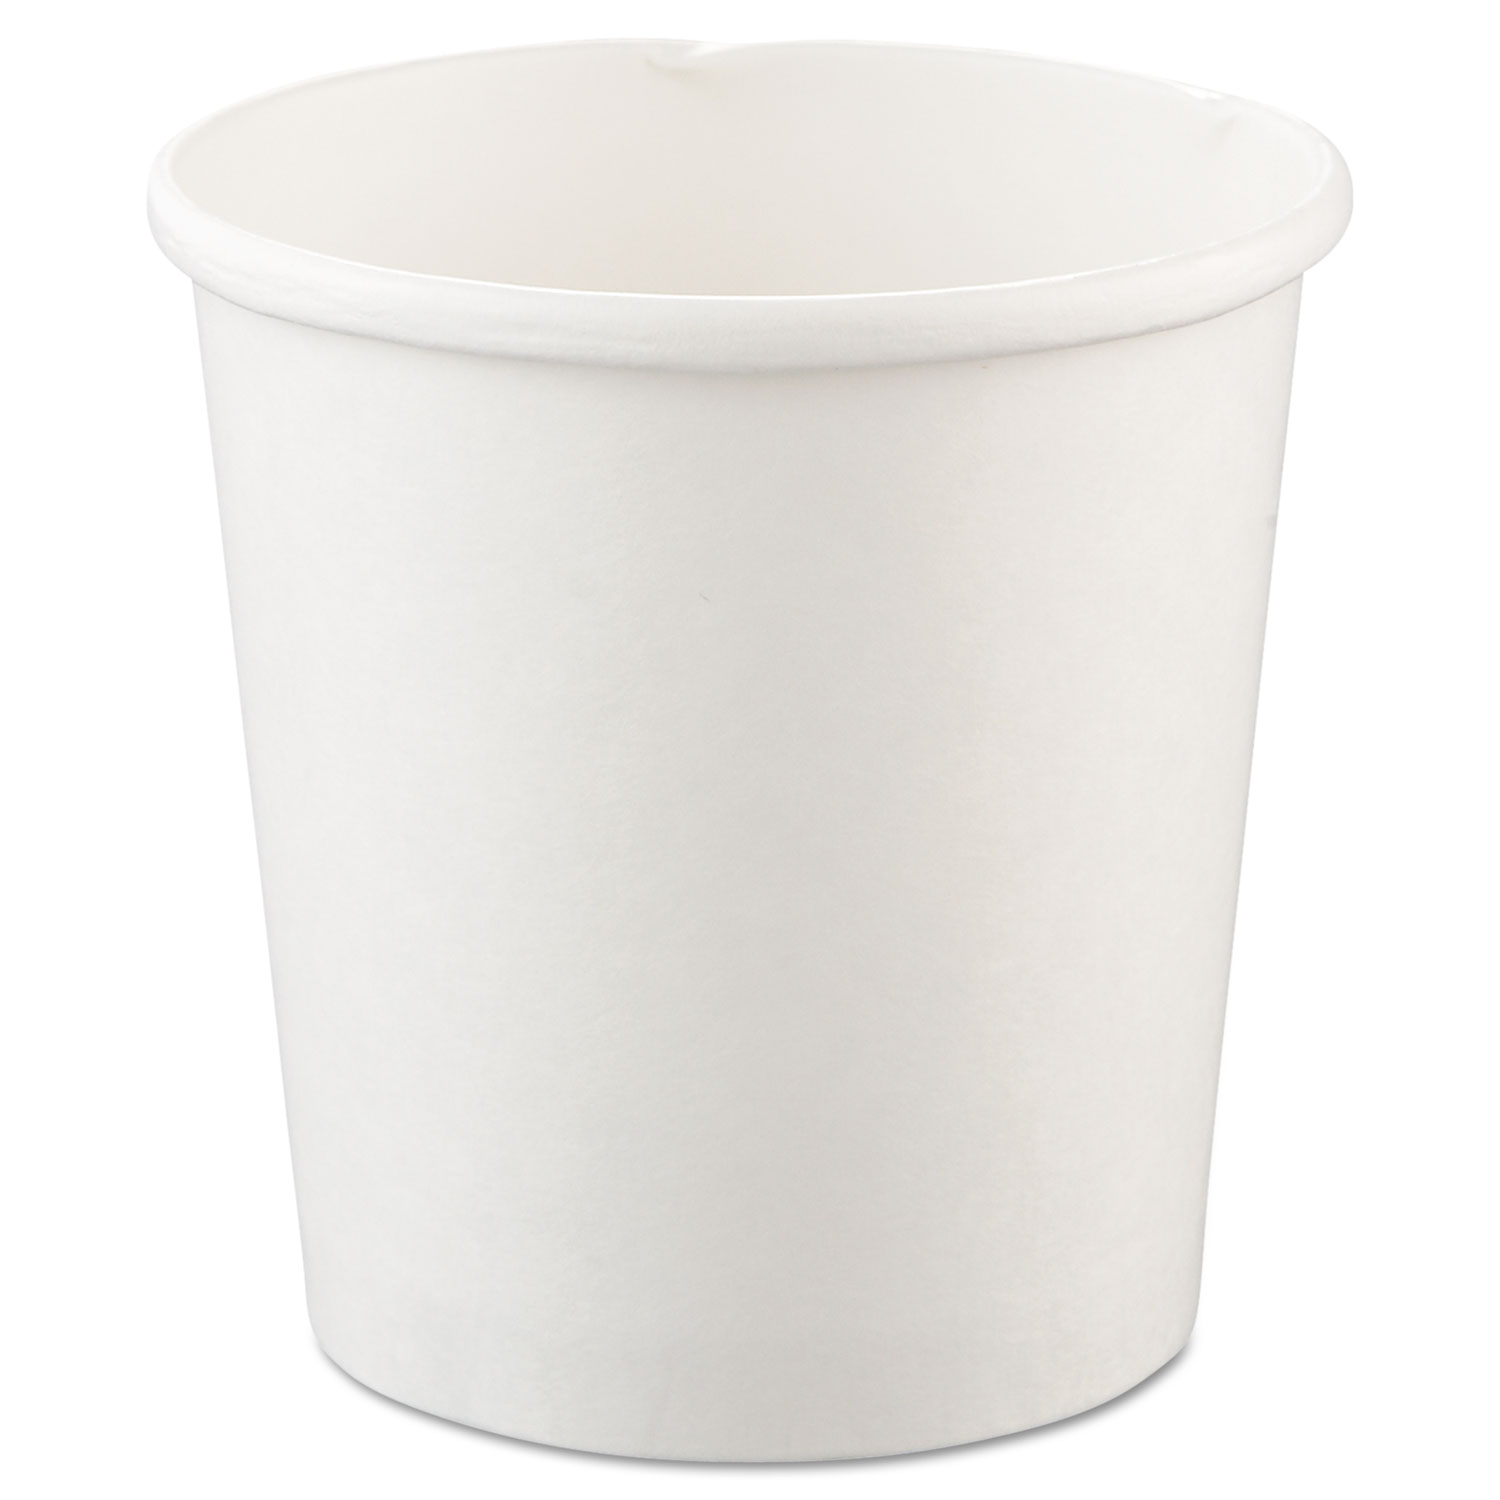  Dart H4165-2050 Flexstyle Double Poly Paper Containers, 16oz, White, 25/Pack, 20 Packs/Carton (SCCH4165U) 